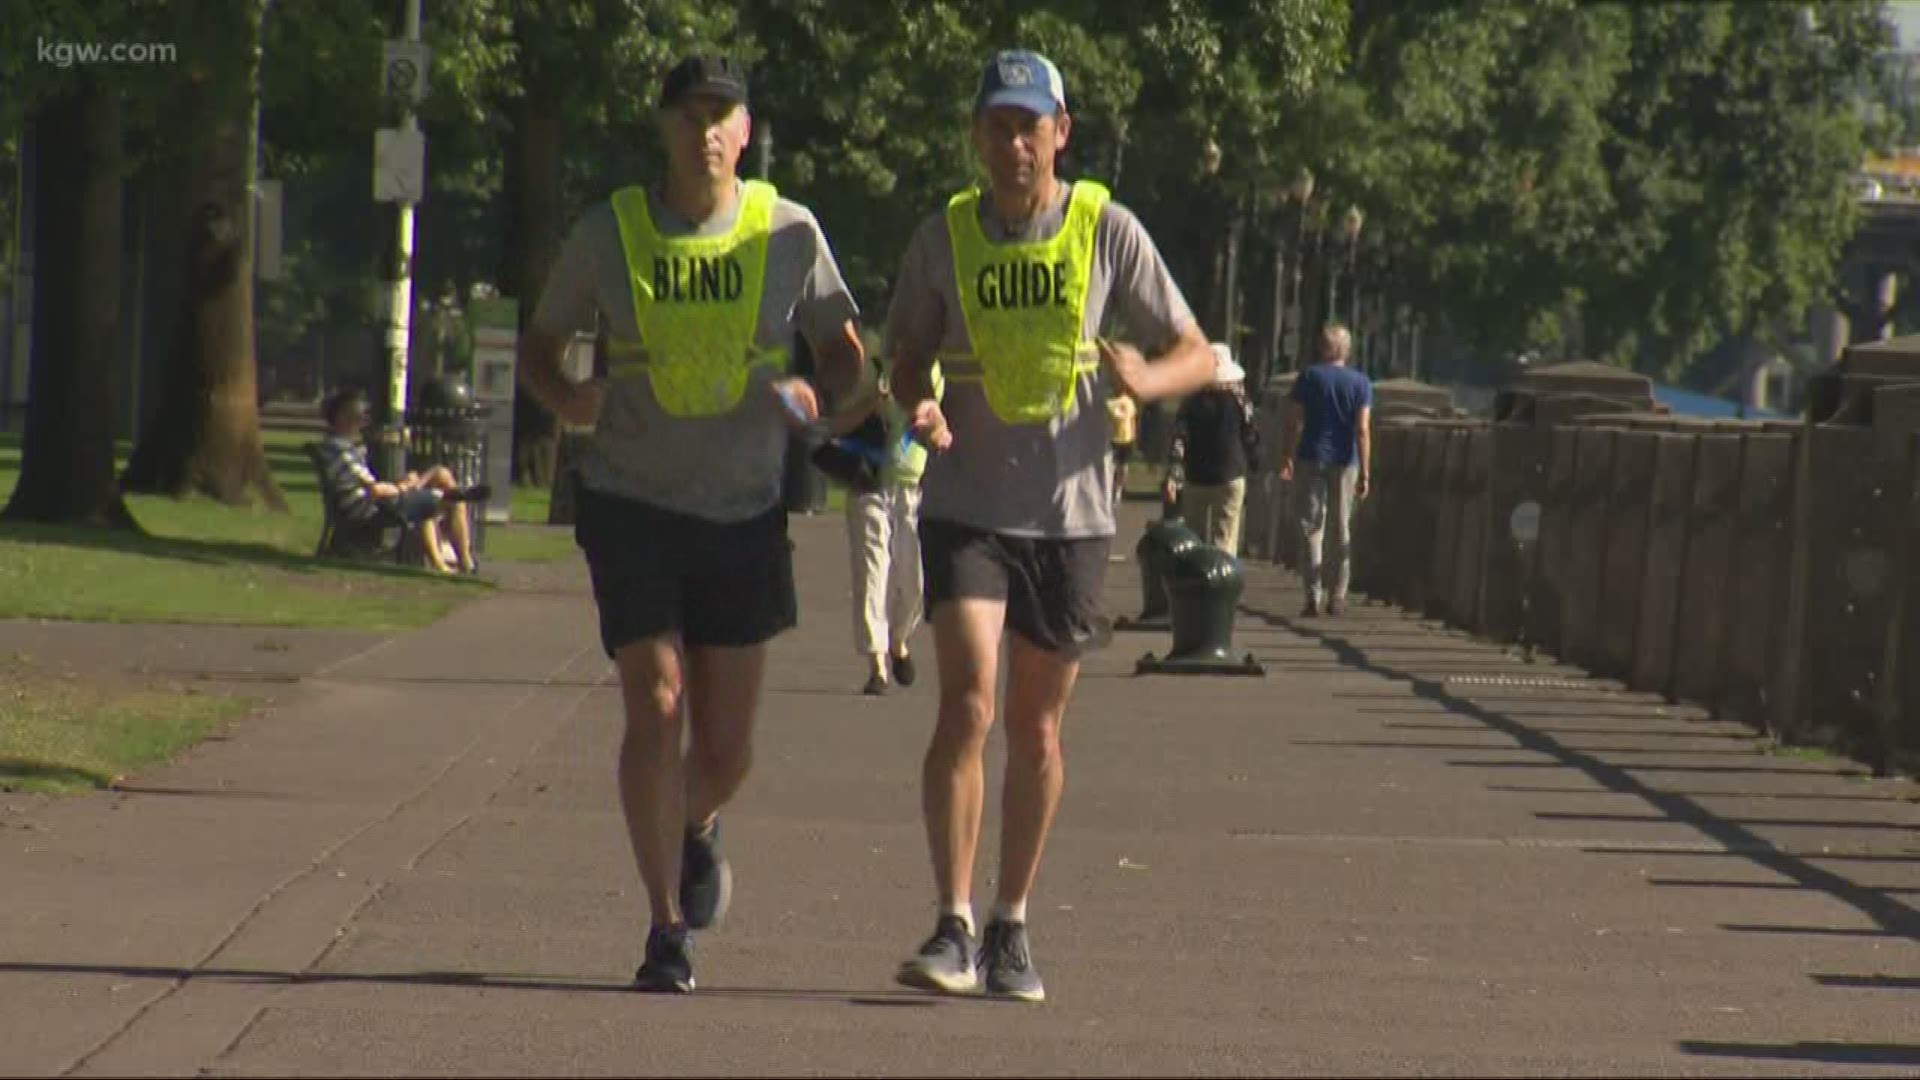 A full team of blind or visually impaired runners will take to the Hood To Coast course this year. They will find their way with the help of running guides.